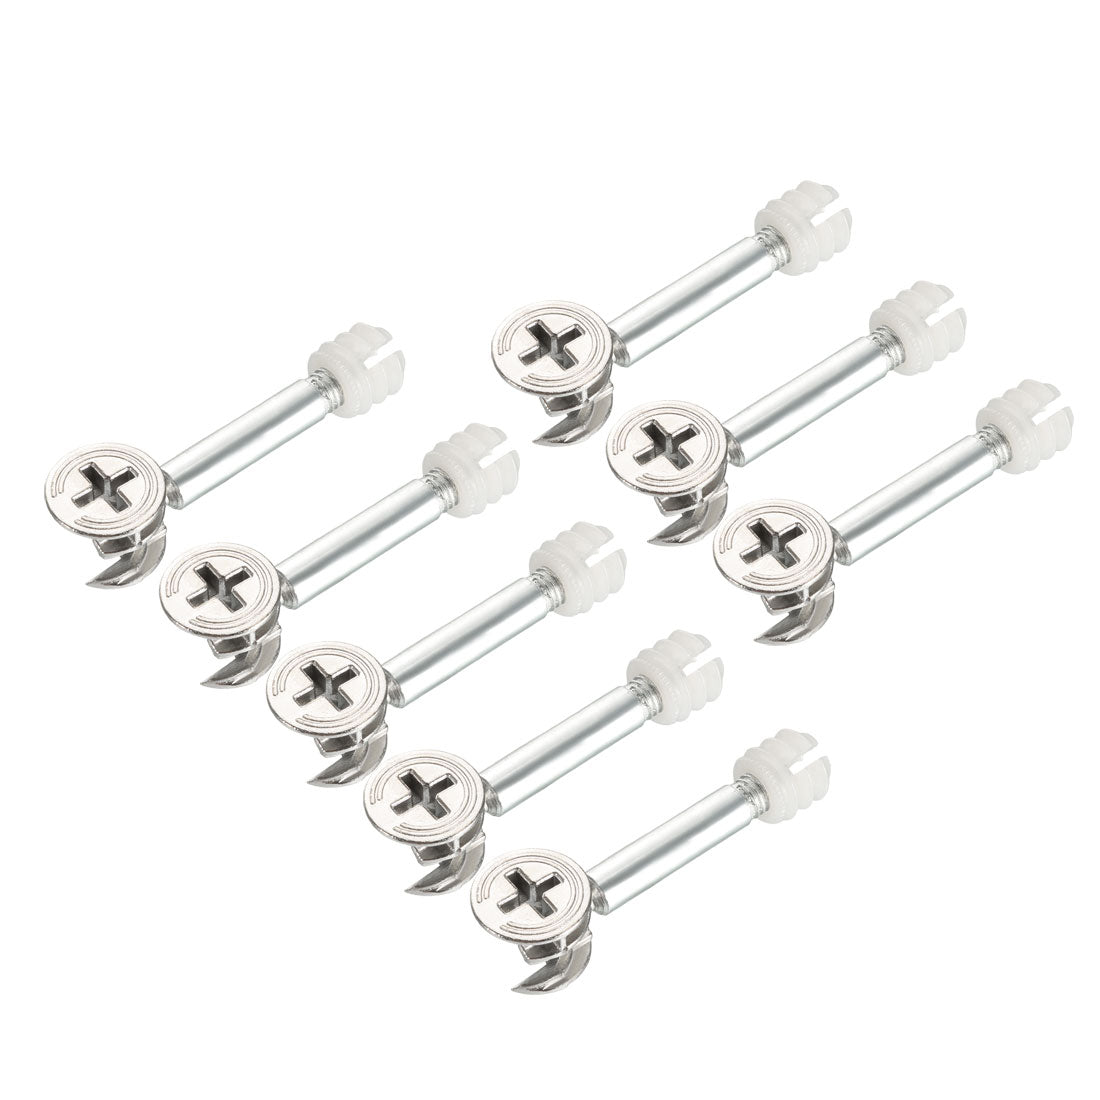 uxcell Uxcell 8 Sets Furniture Connecting 15mm OD Cam Fitting with Dowel Nut Assembly